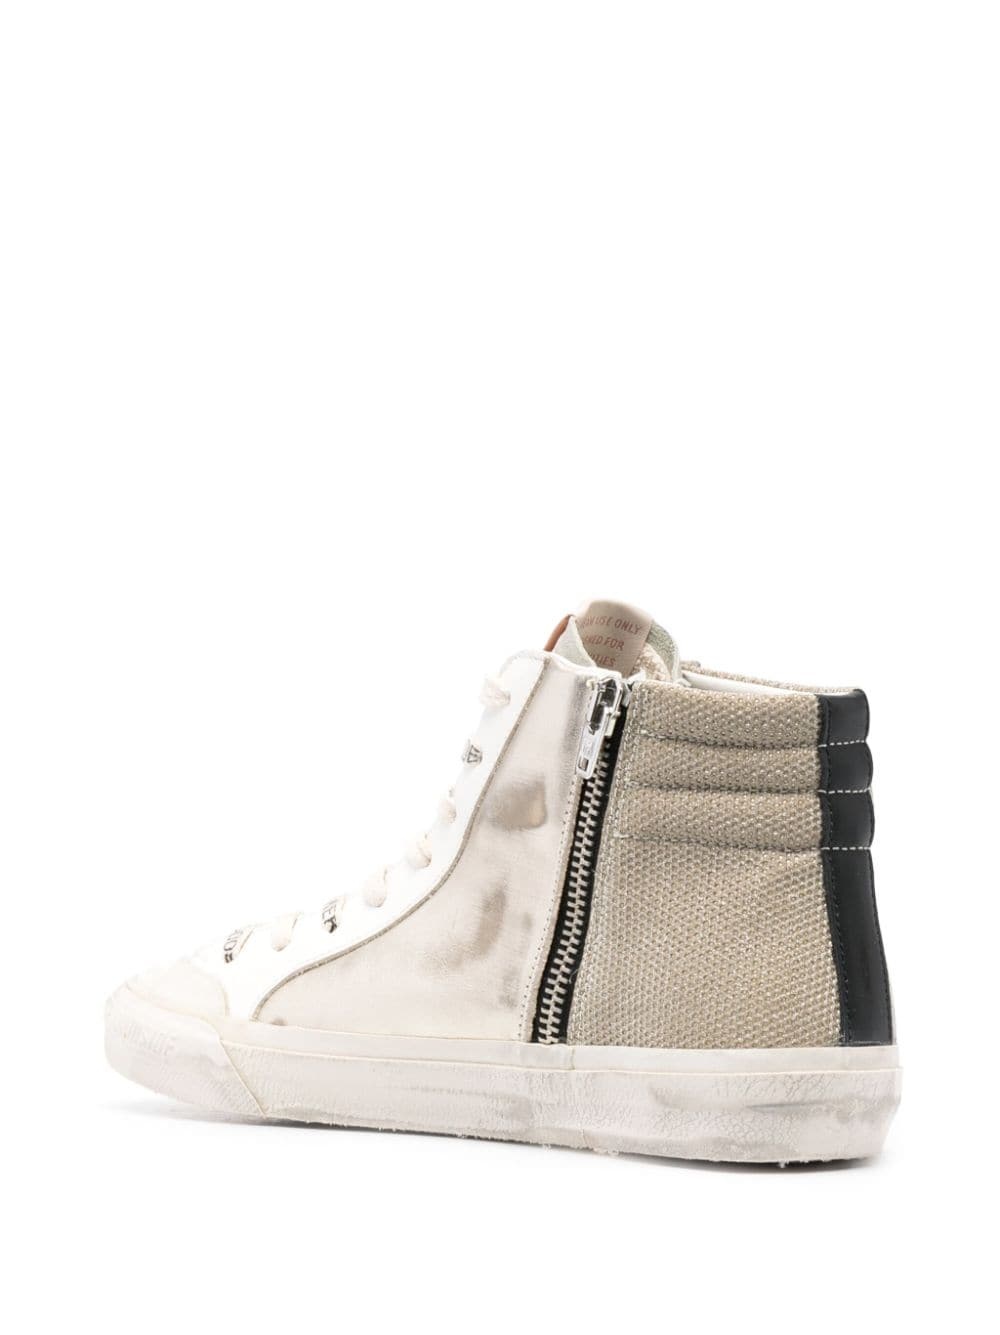 Slide leather sneakers - 3